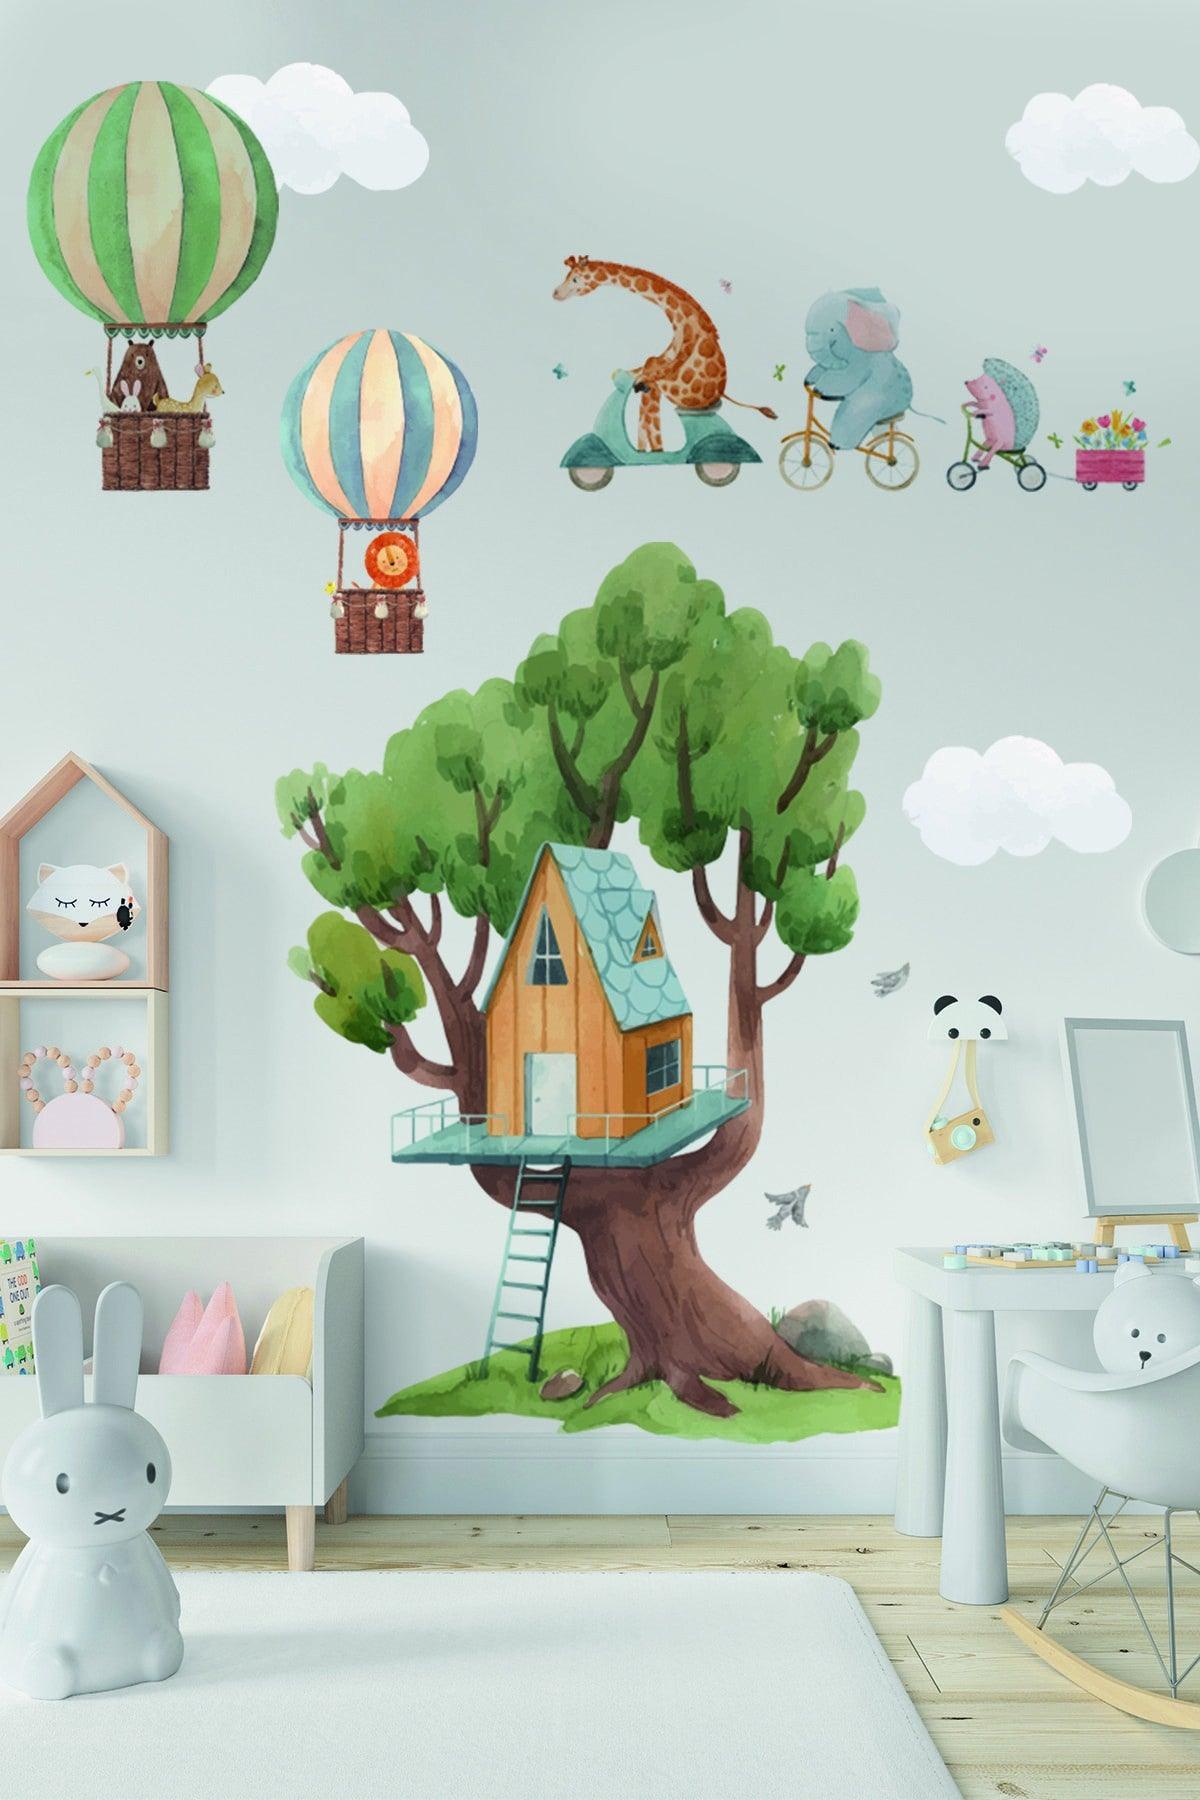 Realm of Happiness Wall Sticker - Swordslife